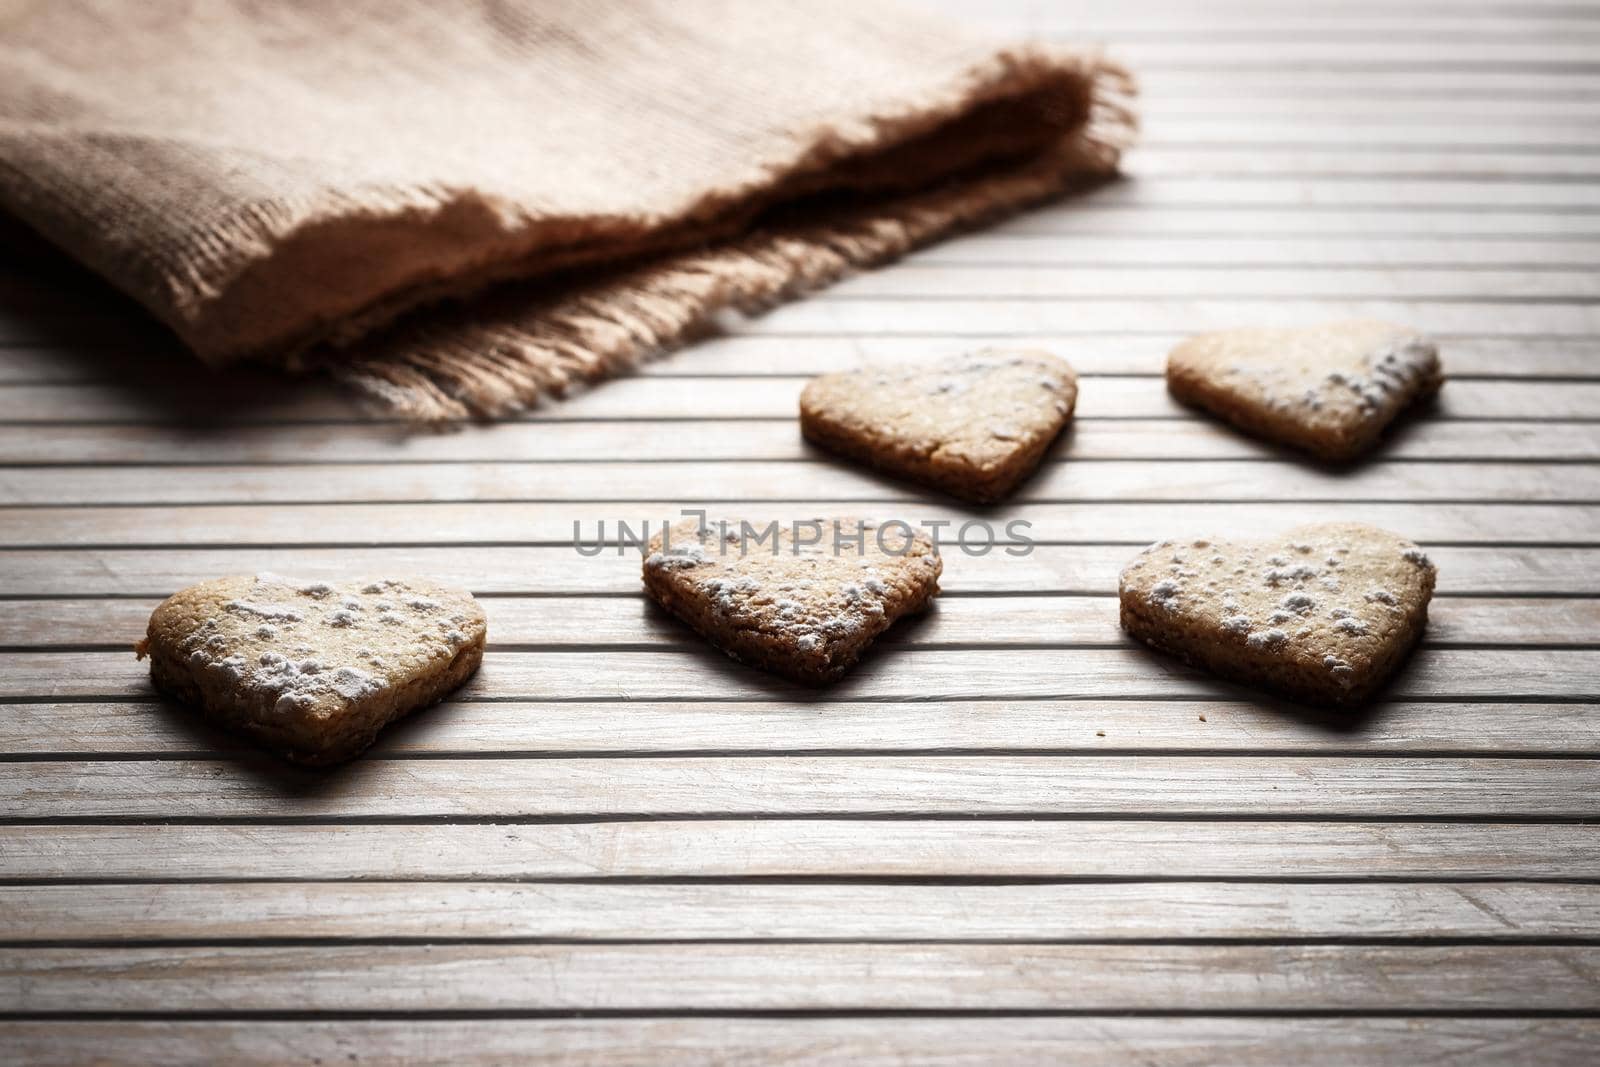 Delicious heart-shaped homemade cookies sprinkled with icing sugar on a wooden board with sackcloth in the background. Horizontal image seen against backlight.